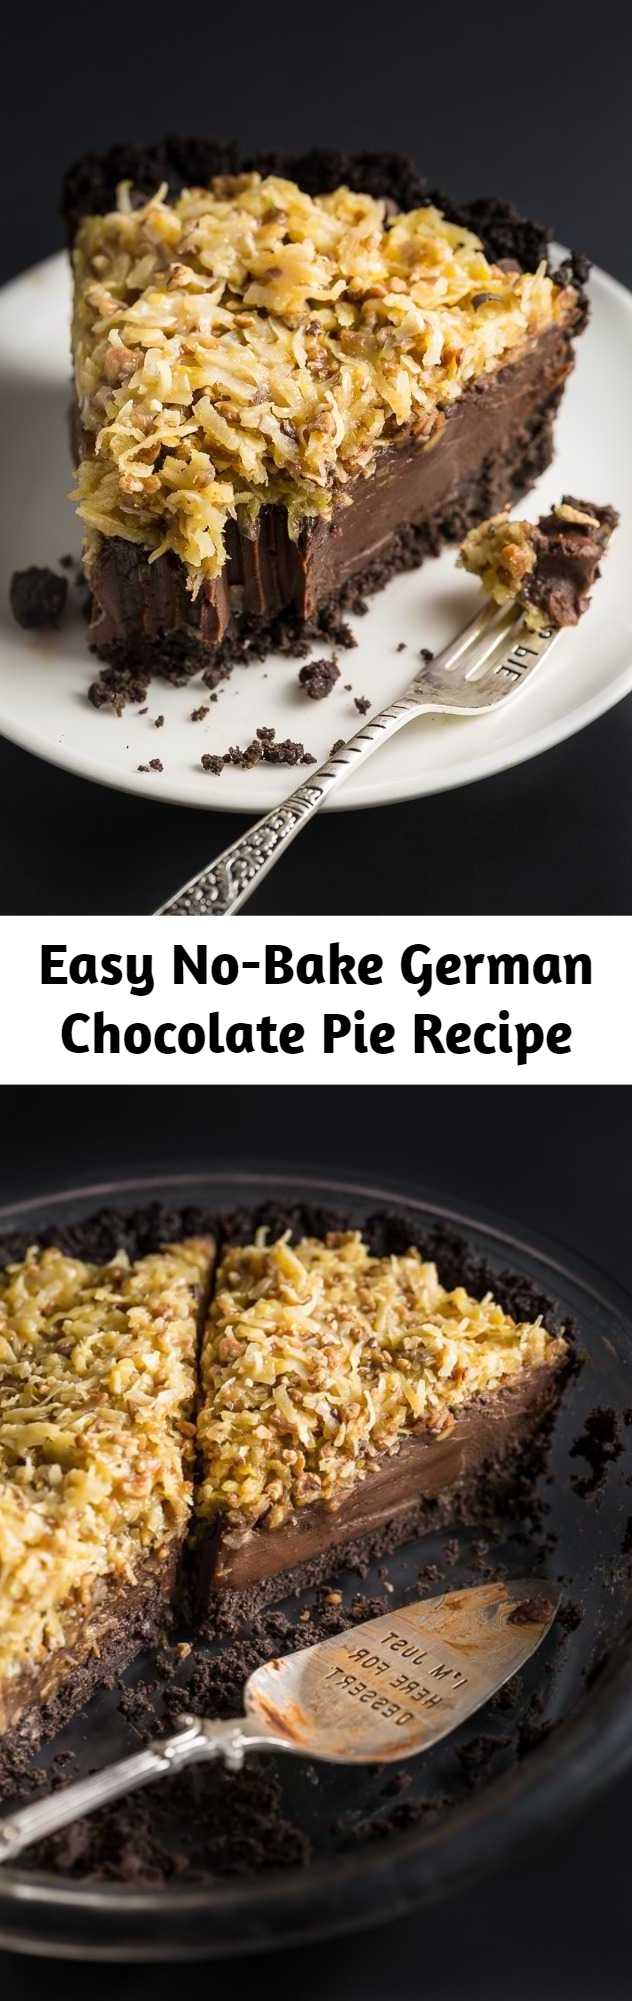 Easy No-Bake German Chocolate Pie Recipe - An easy and indulgent No-Bake German Chocolate Pie Recipe! Featuring a chocolate cookie crust, decadent chocolate filling, and coconut pecan topping, this sinfully sweet pie is always a hit! Perfect for those days it’s too hot to bake!